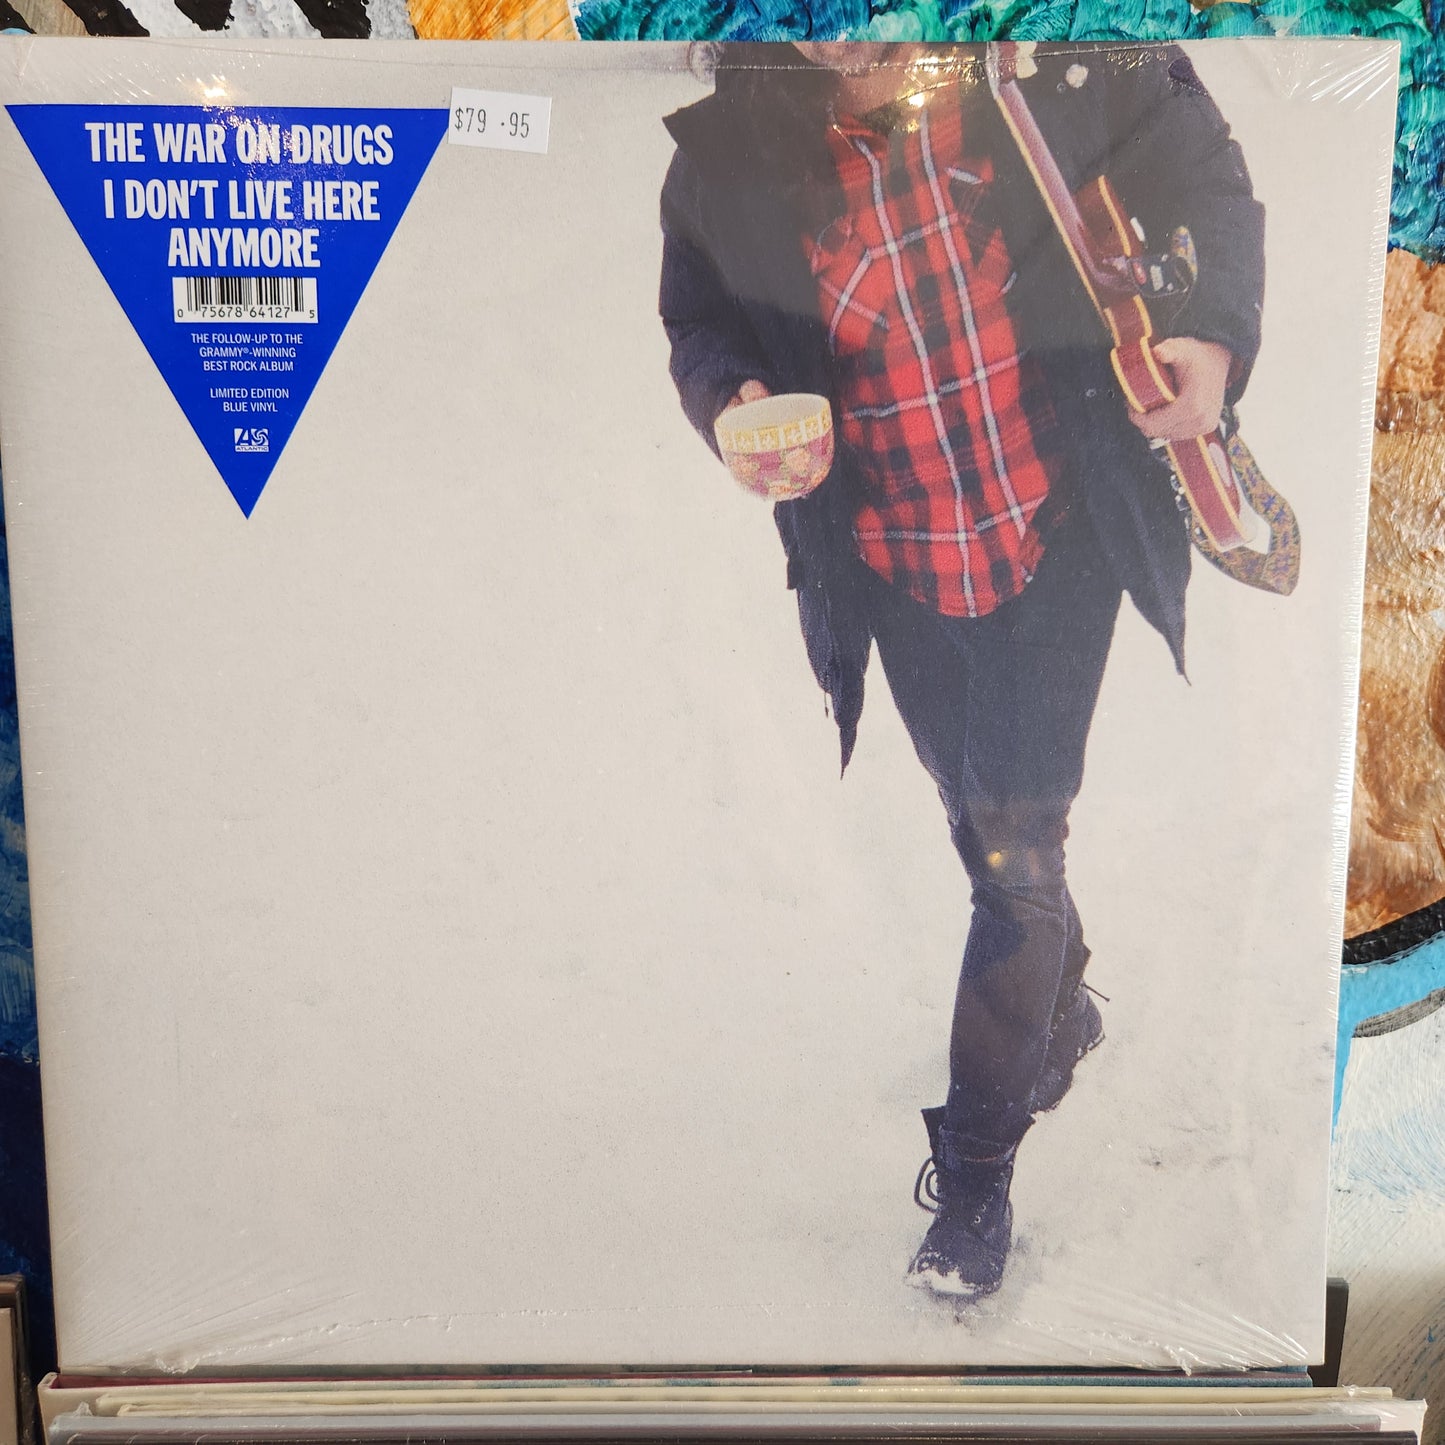 The War on Drugs - I Don't live here anymore - Limited Blue  Vinyl LP